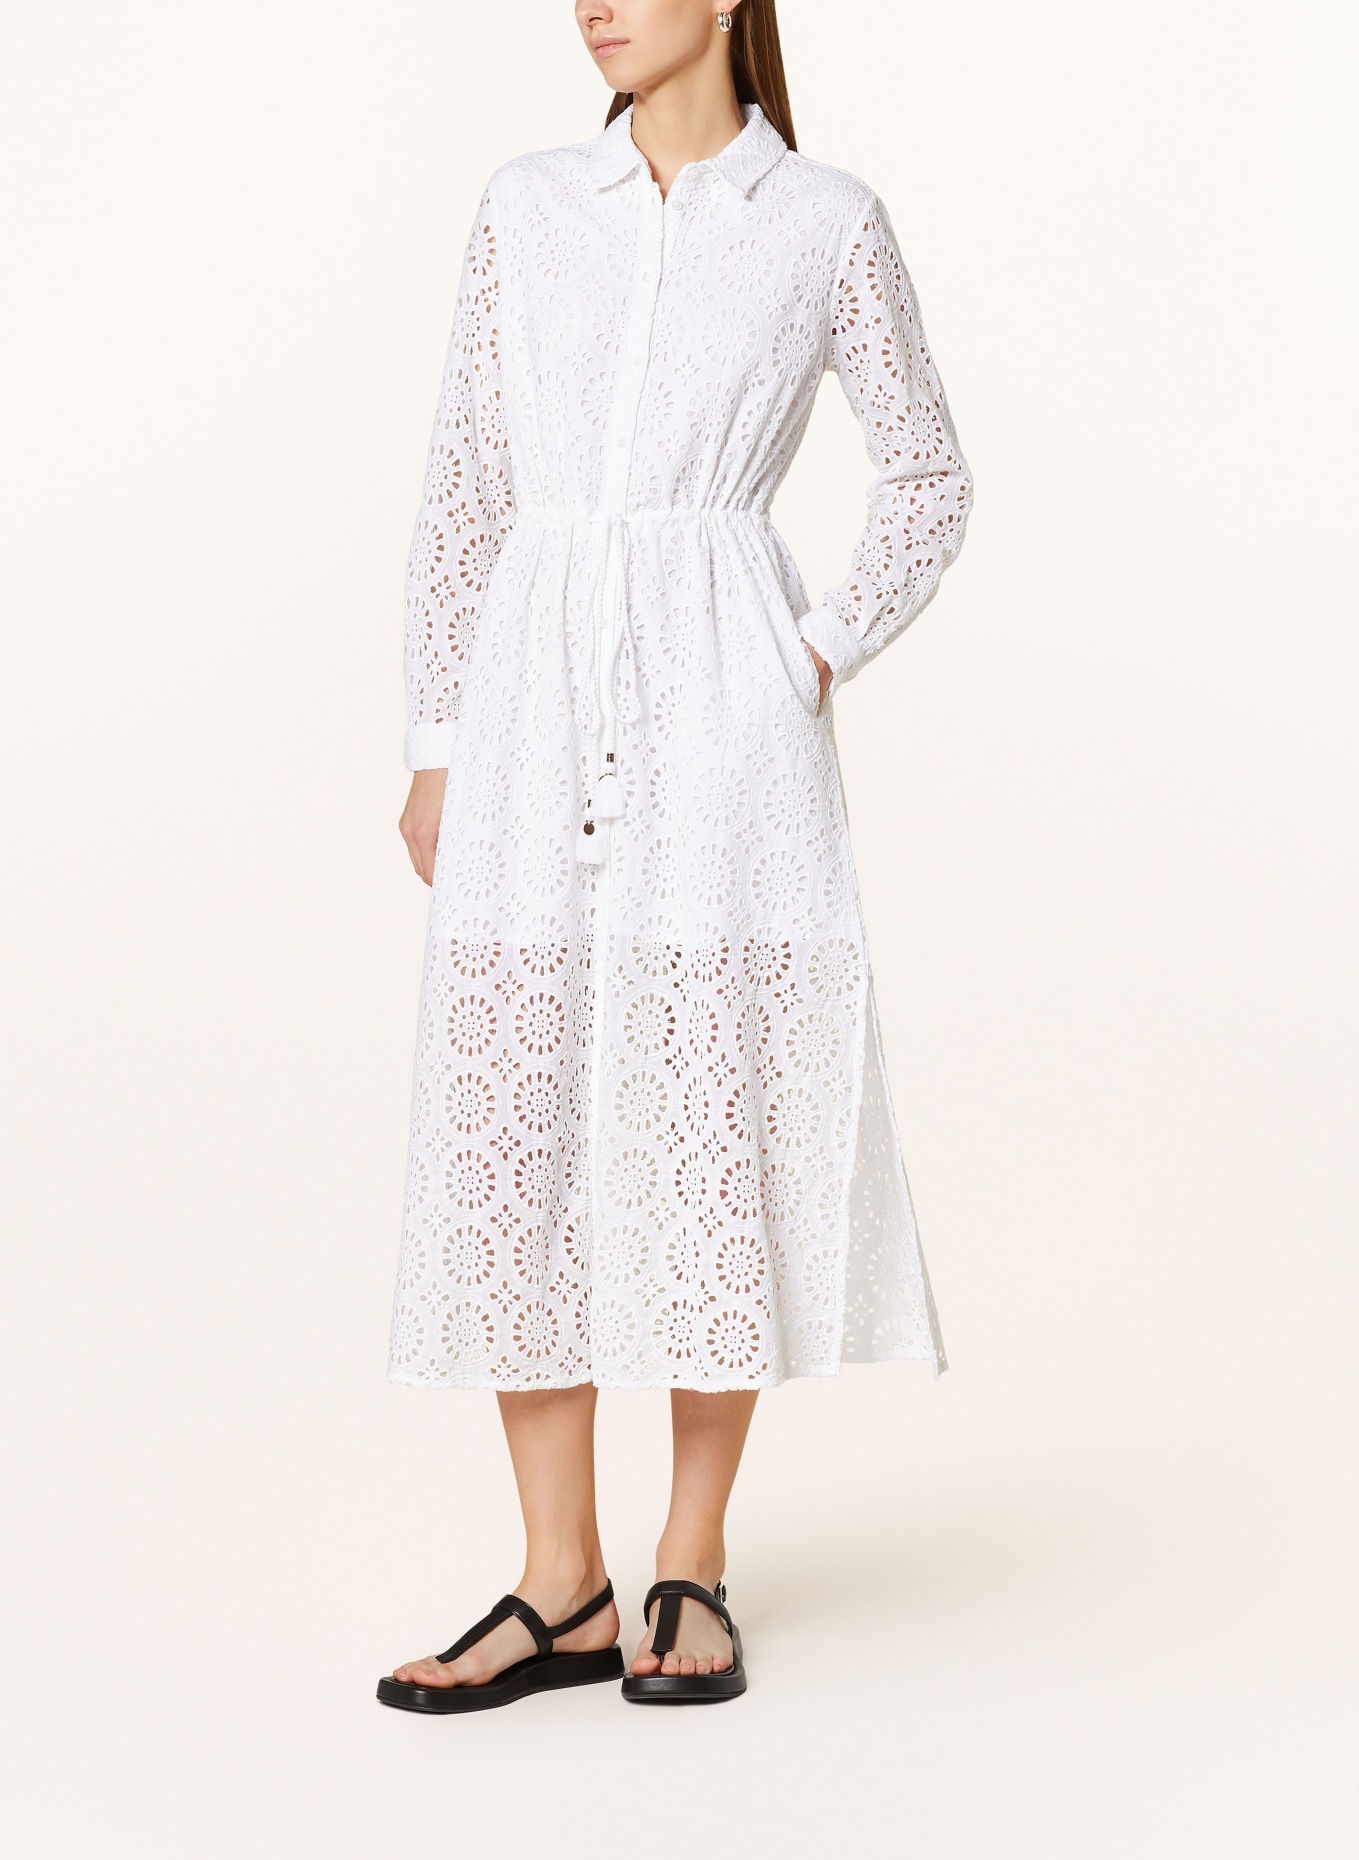 Pepe Jeans Shirt dress ETHEL made of lace, Color: WHITE (Image 2)